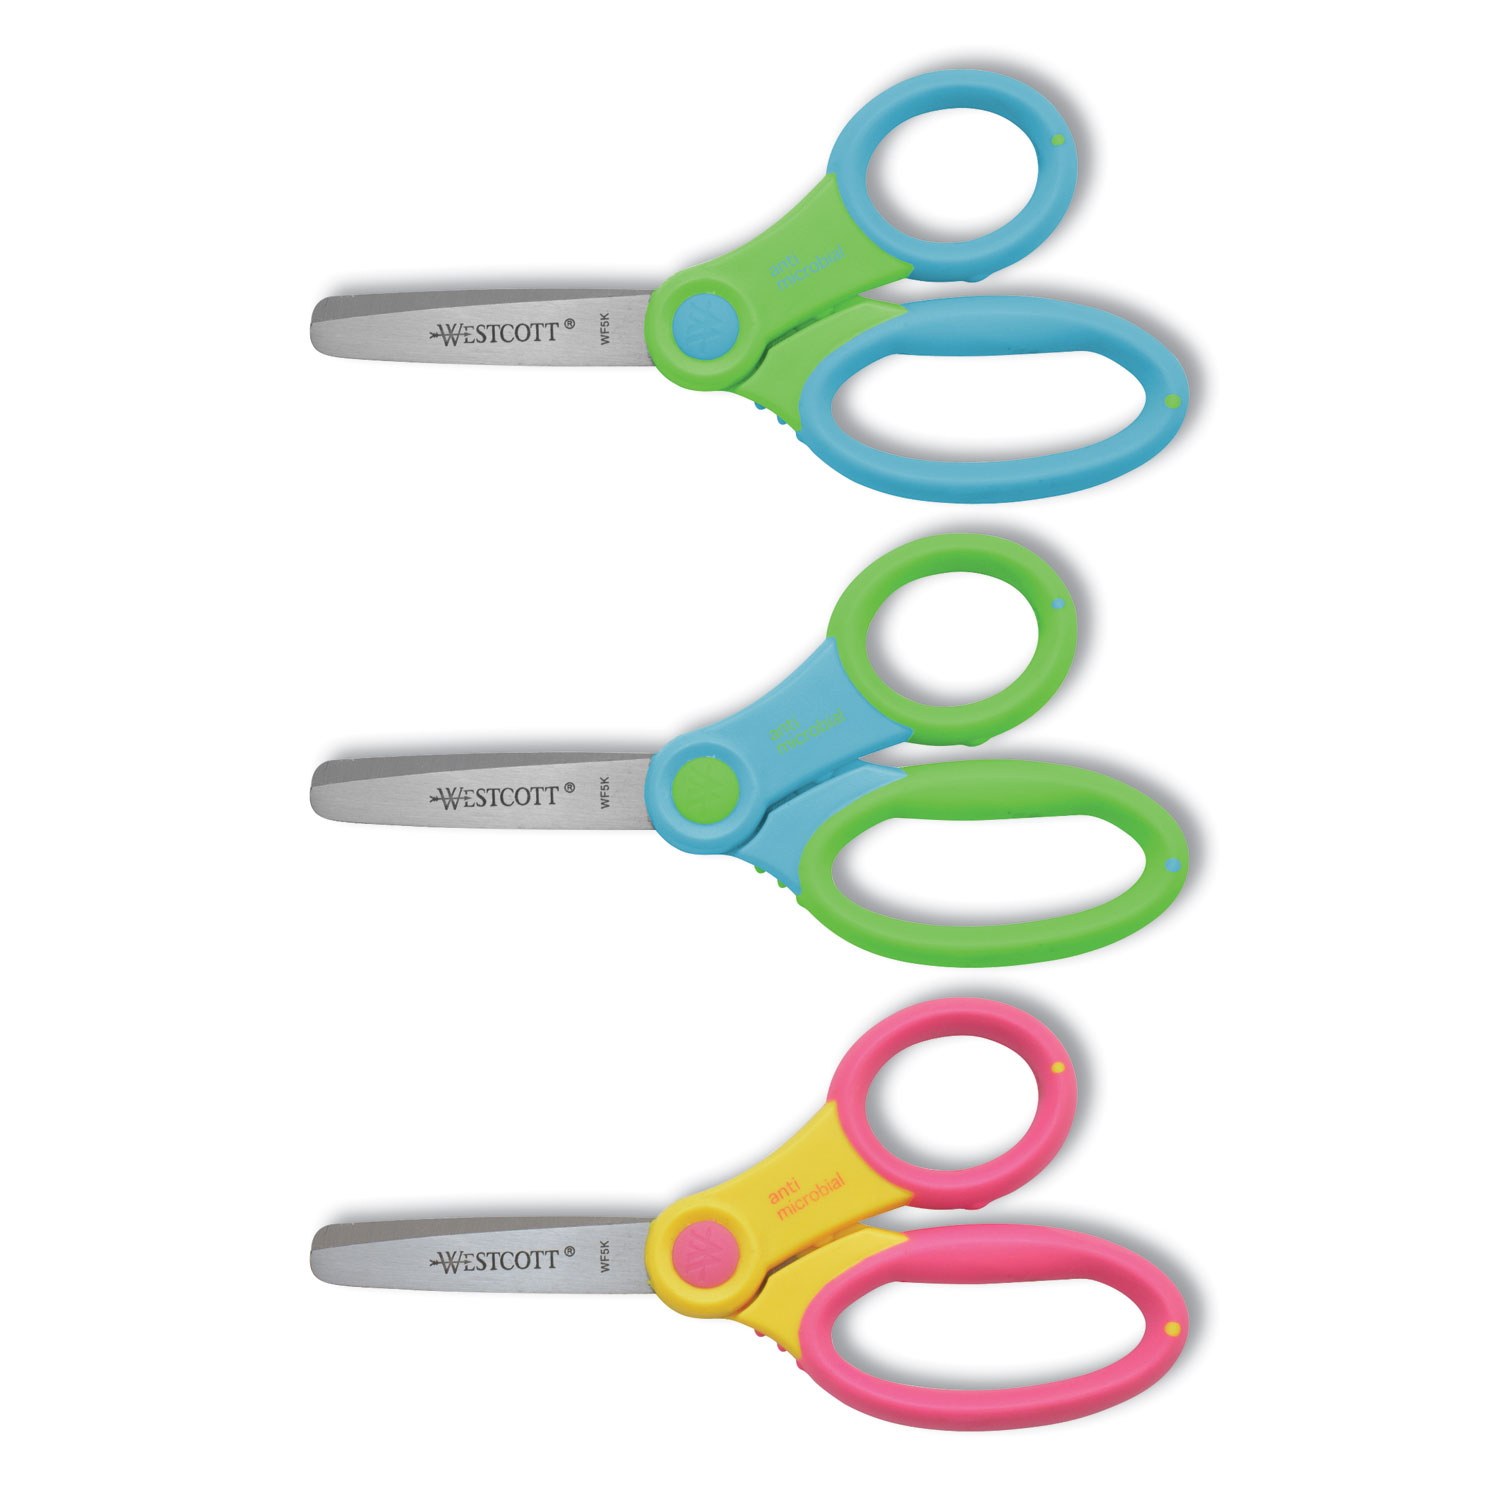  Westcott 14596 Ultra Soft Handle Scissors with Antimicrobial Protection, 5 Long, 2 Cut Length, Randomly Assorted Straight Handles (ACM14596) 